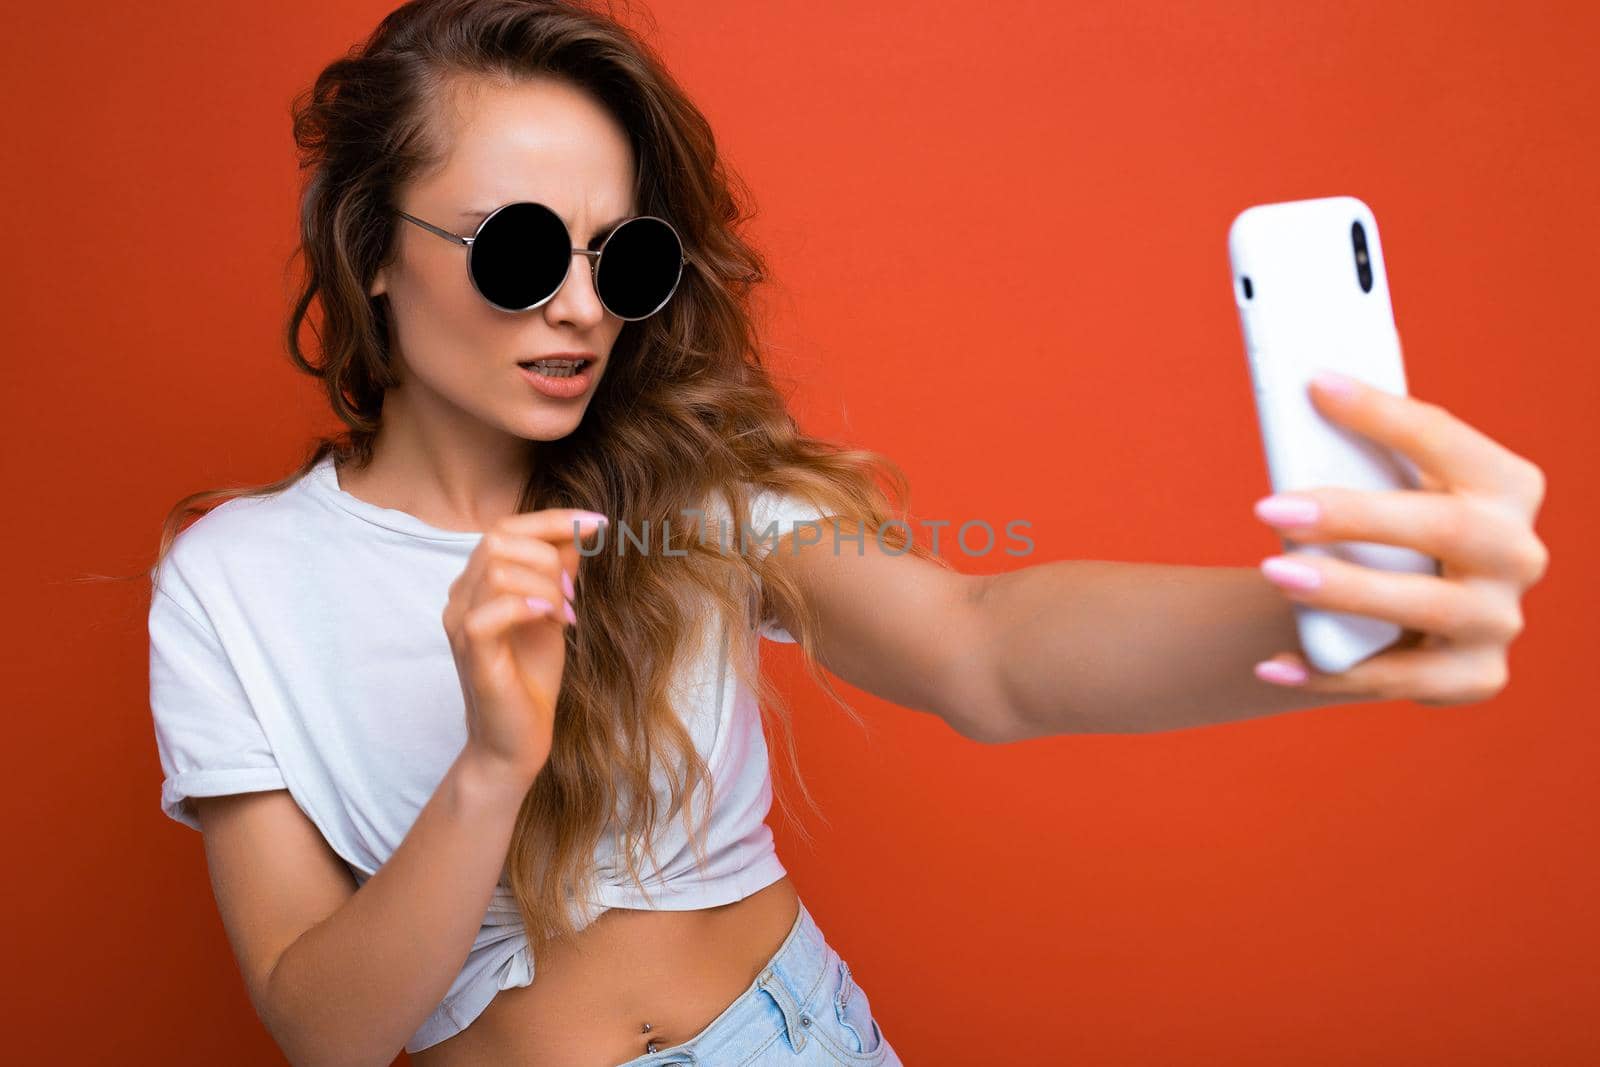 Amazing beautiful young blonde woman holding mobile phone taking selfie photo using smartphone camera wearing everyday stylish outfit isolated over colorful wall background looking at device screen.